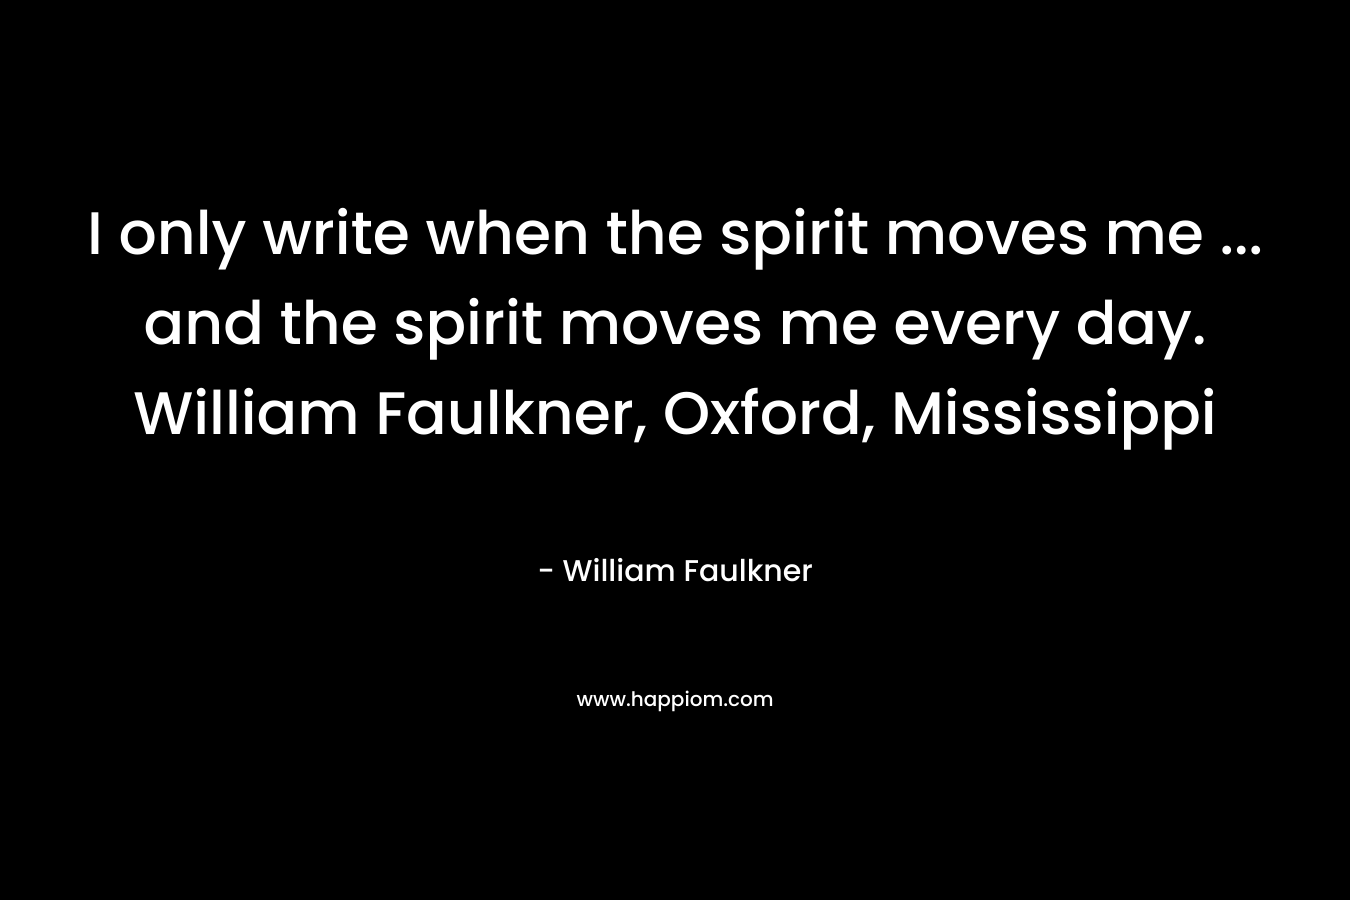 I only write when the spirit moves me ... and the spirit moves me every day. William Faulkner, Oxford, Mississippi